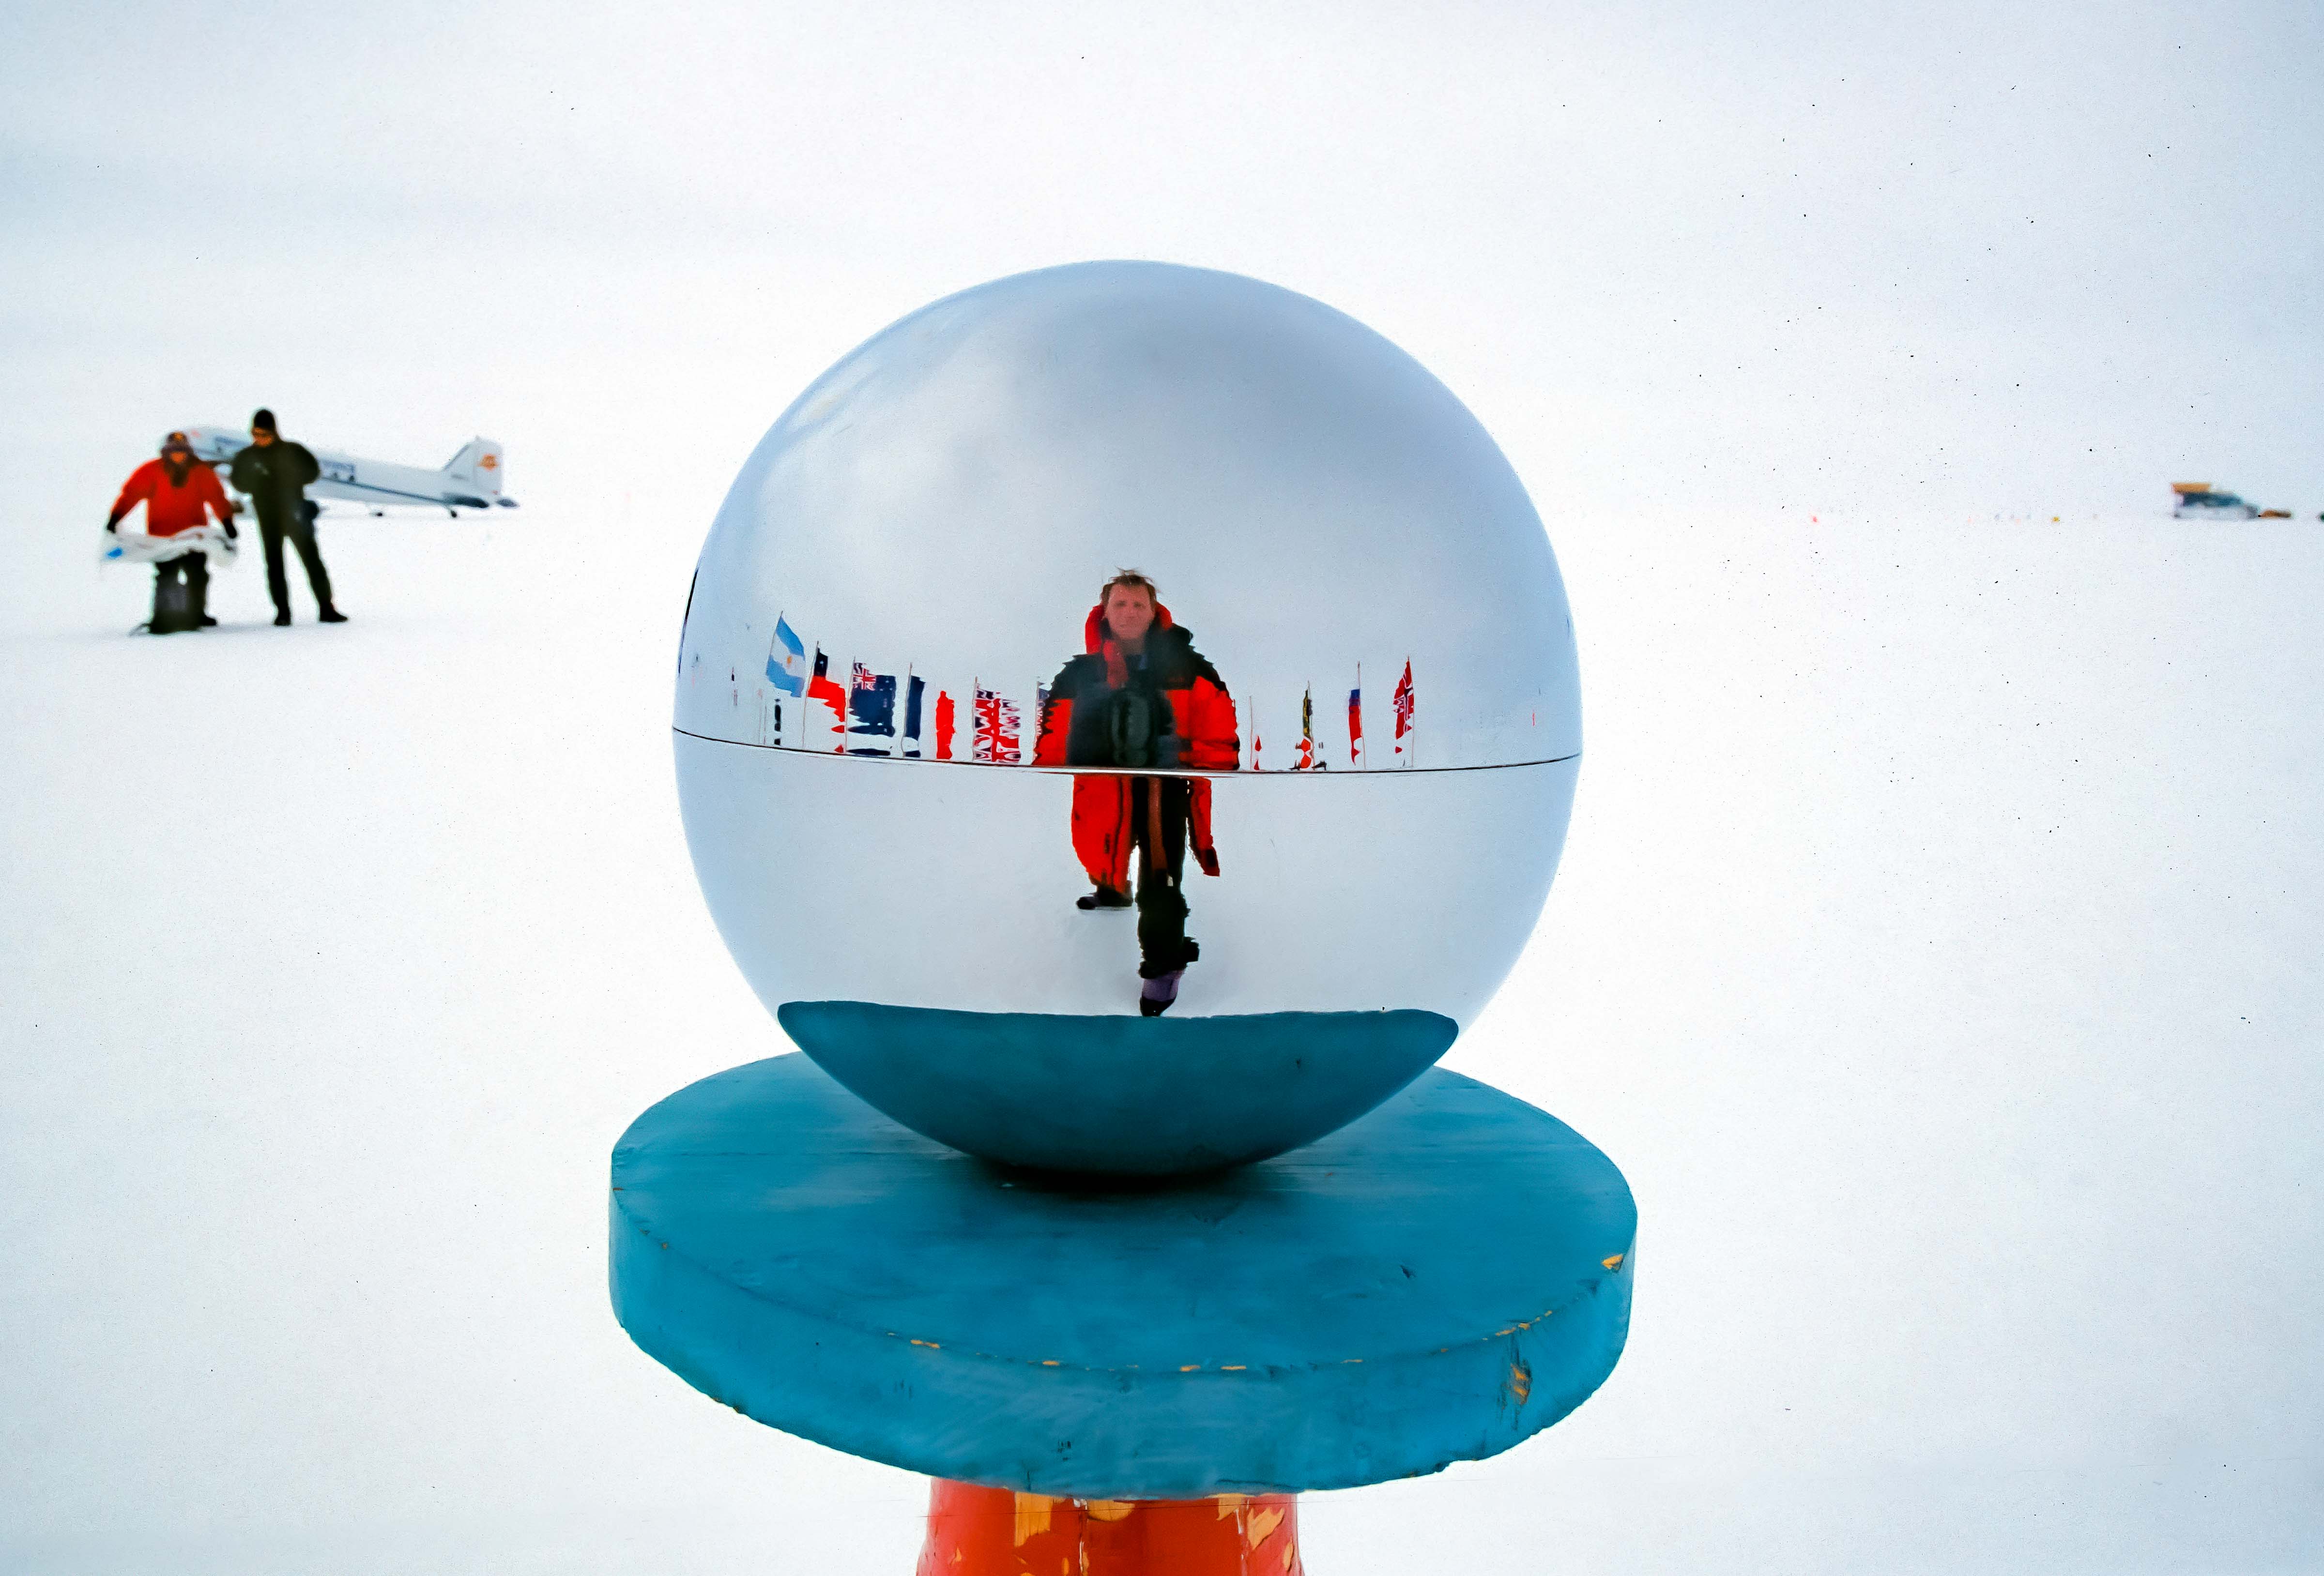 Antarctica, Jeff Shea at South Pole in Globe with Plane, 2001